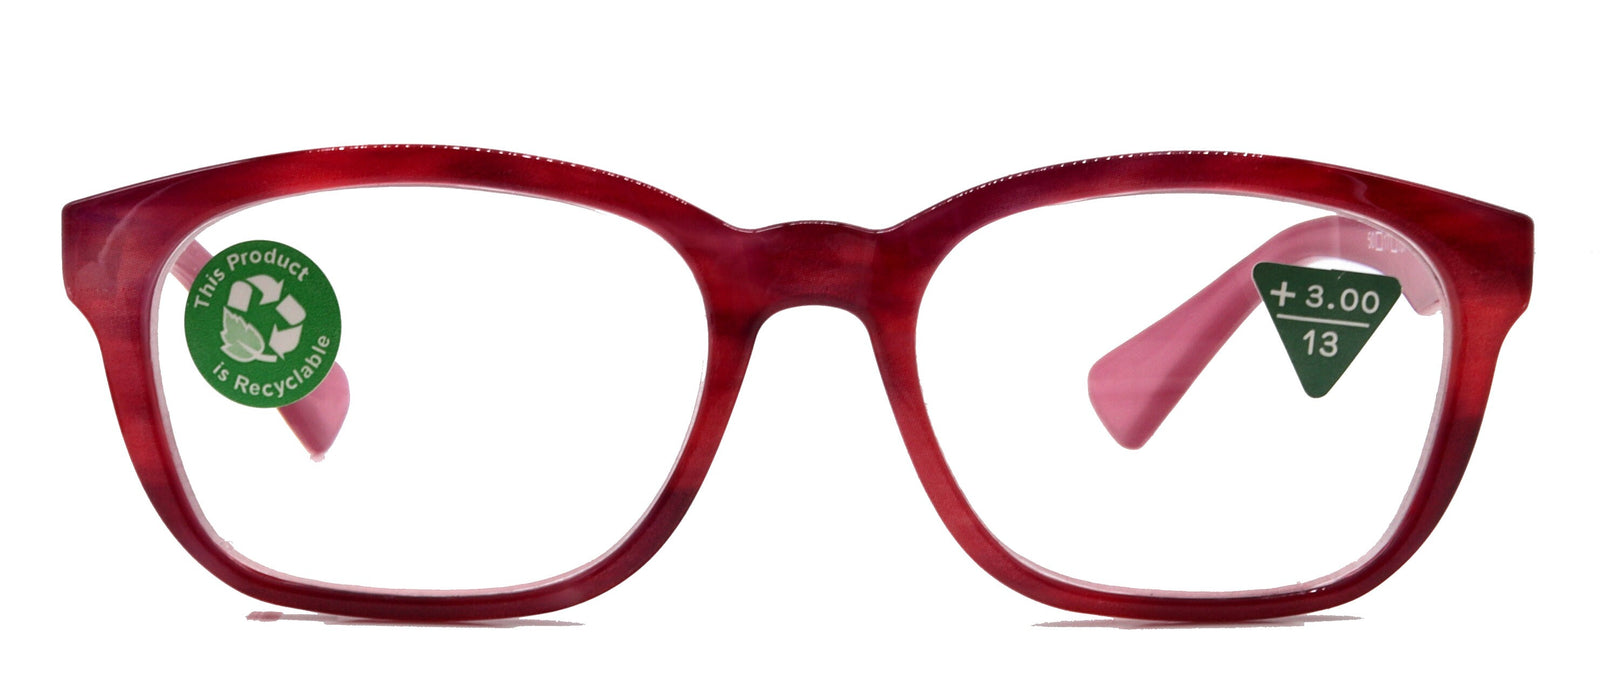 Coral, (Premium) Reading Glasses, High End Readers +1.25 to +3. Magnifying Glasses (Pink) Rectangular style. Optical Frame. NY Fifth Avenue.